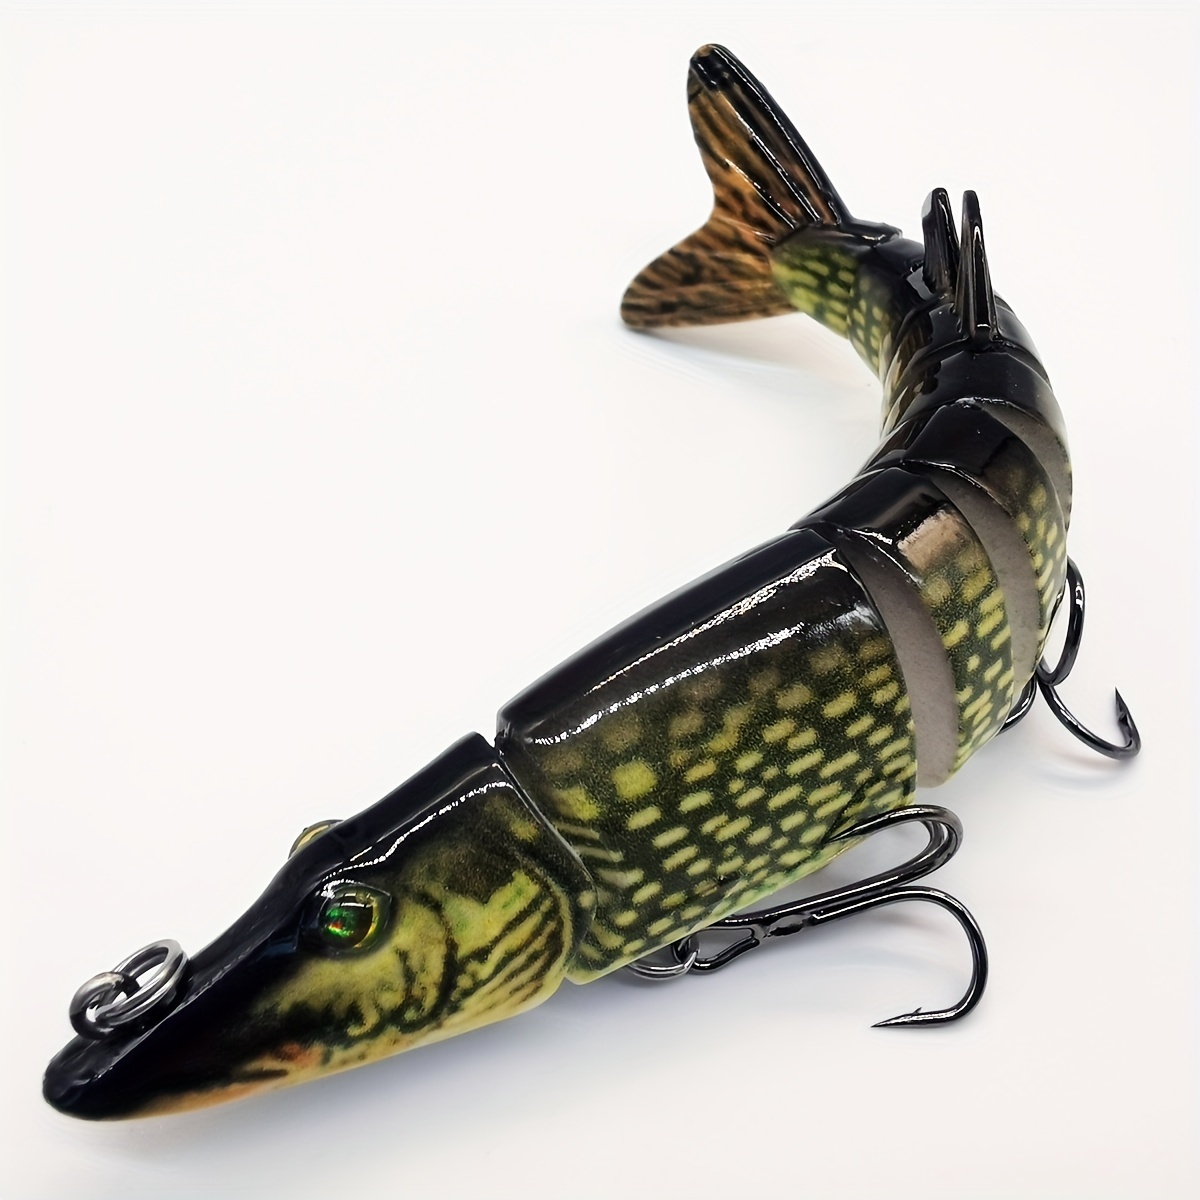 Siek-M Scorpion 7cm 6g / floating lure for pike, trout, ide, large